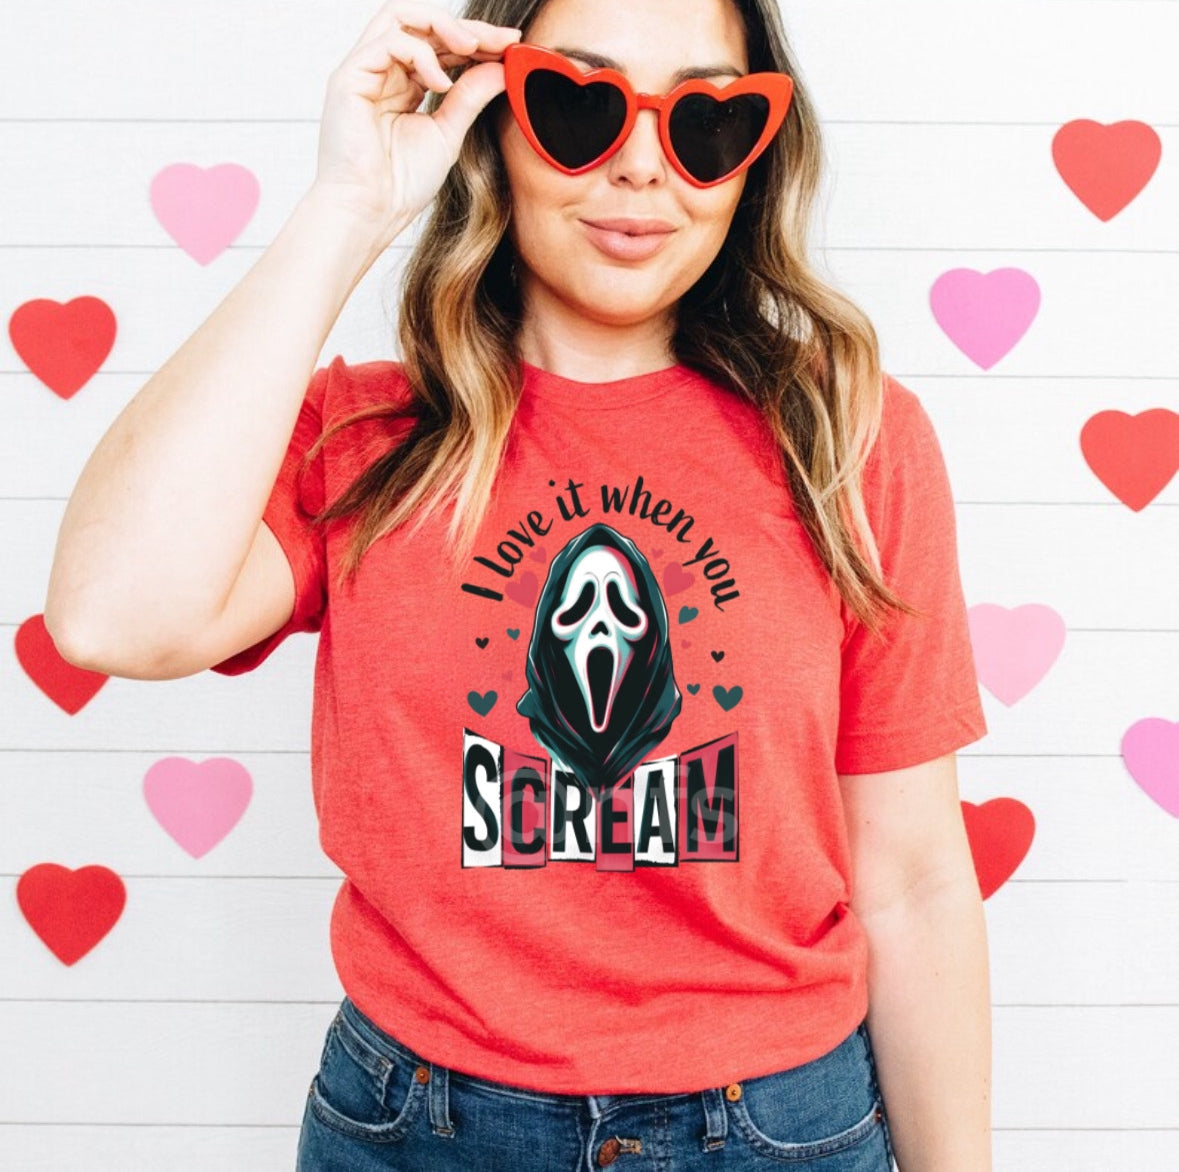 This I Love It When You Scream Valentine Women's Tee Shirt is perfect for those who love to make a statement. With its bold print featuring the phrase "I Love It When You Scream", this tee is sure to turn heads. Made with high-quality materials